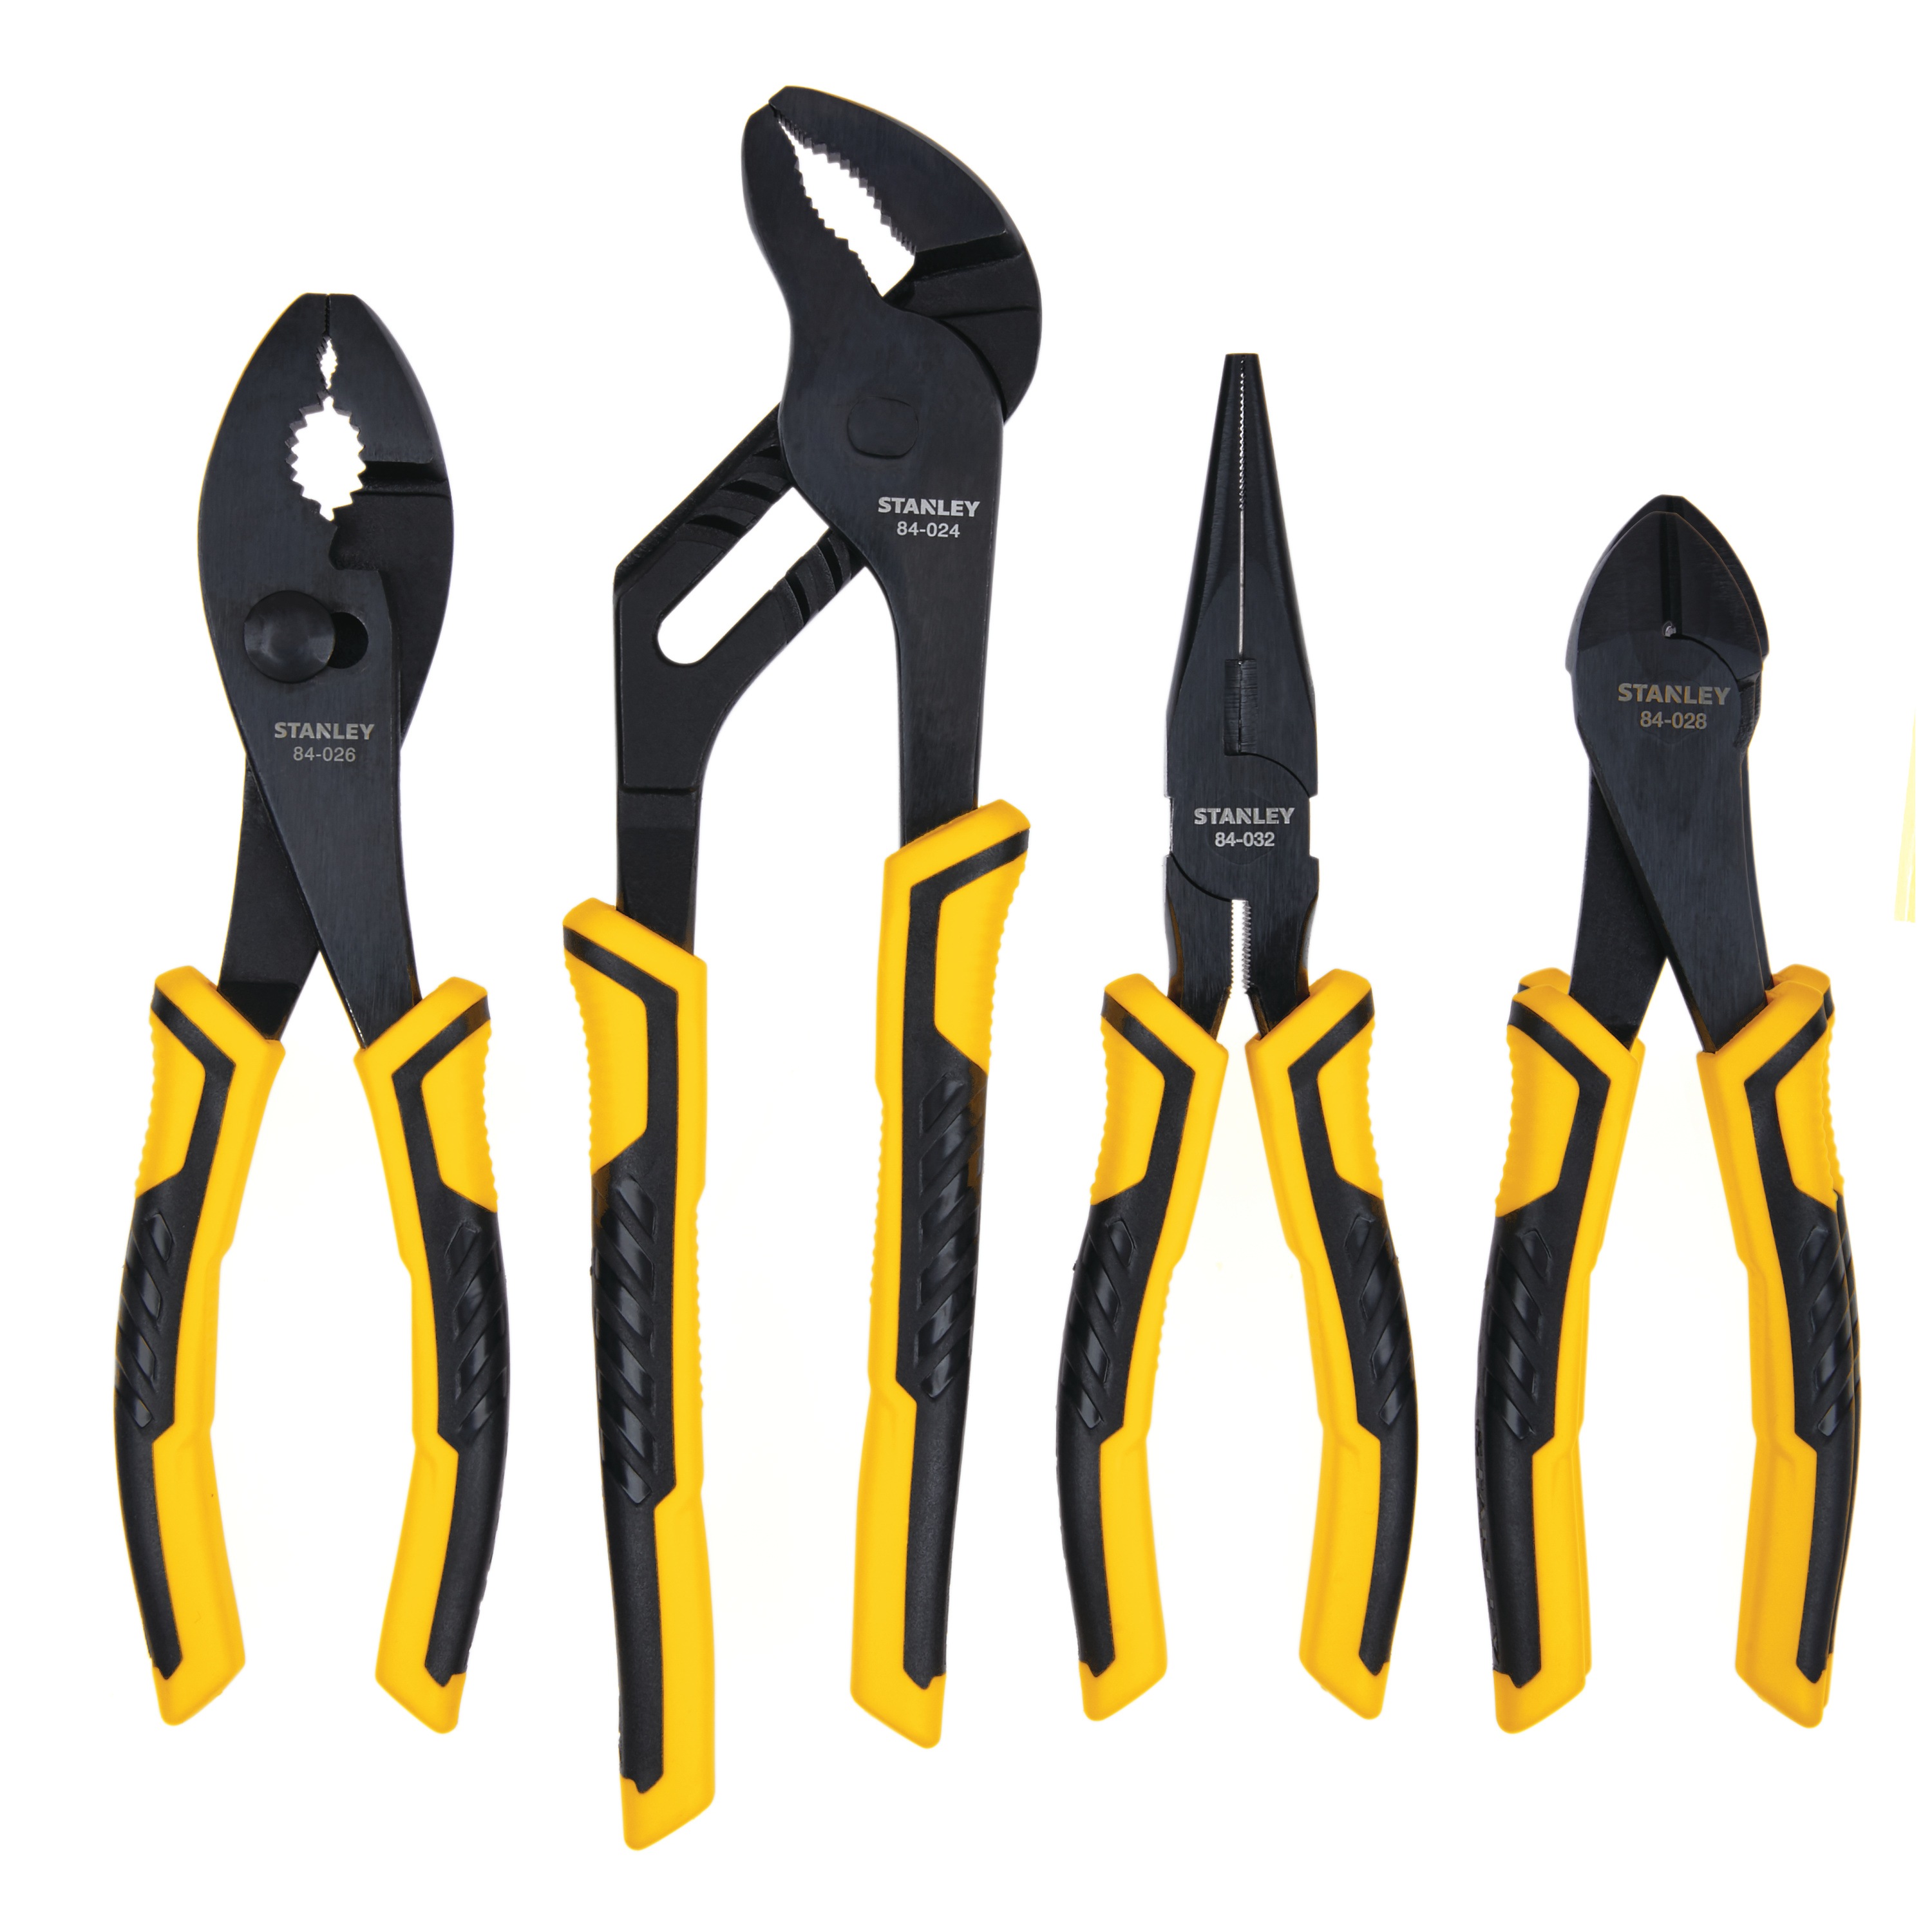 3 types of pliers